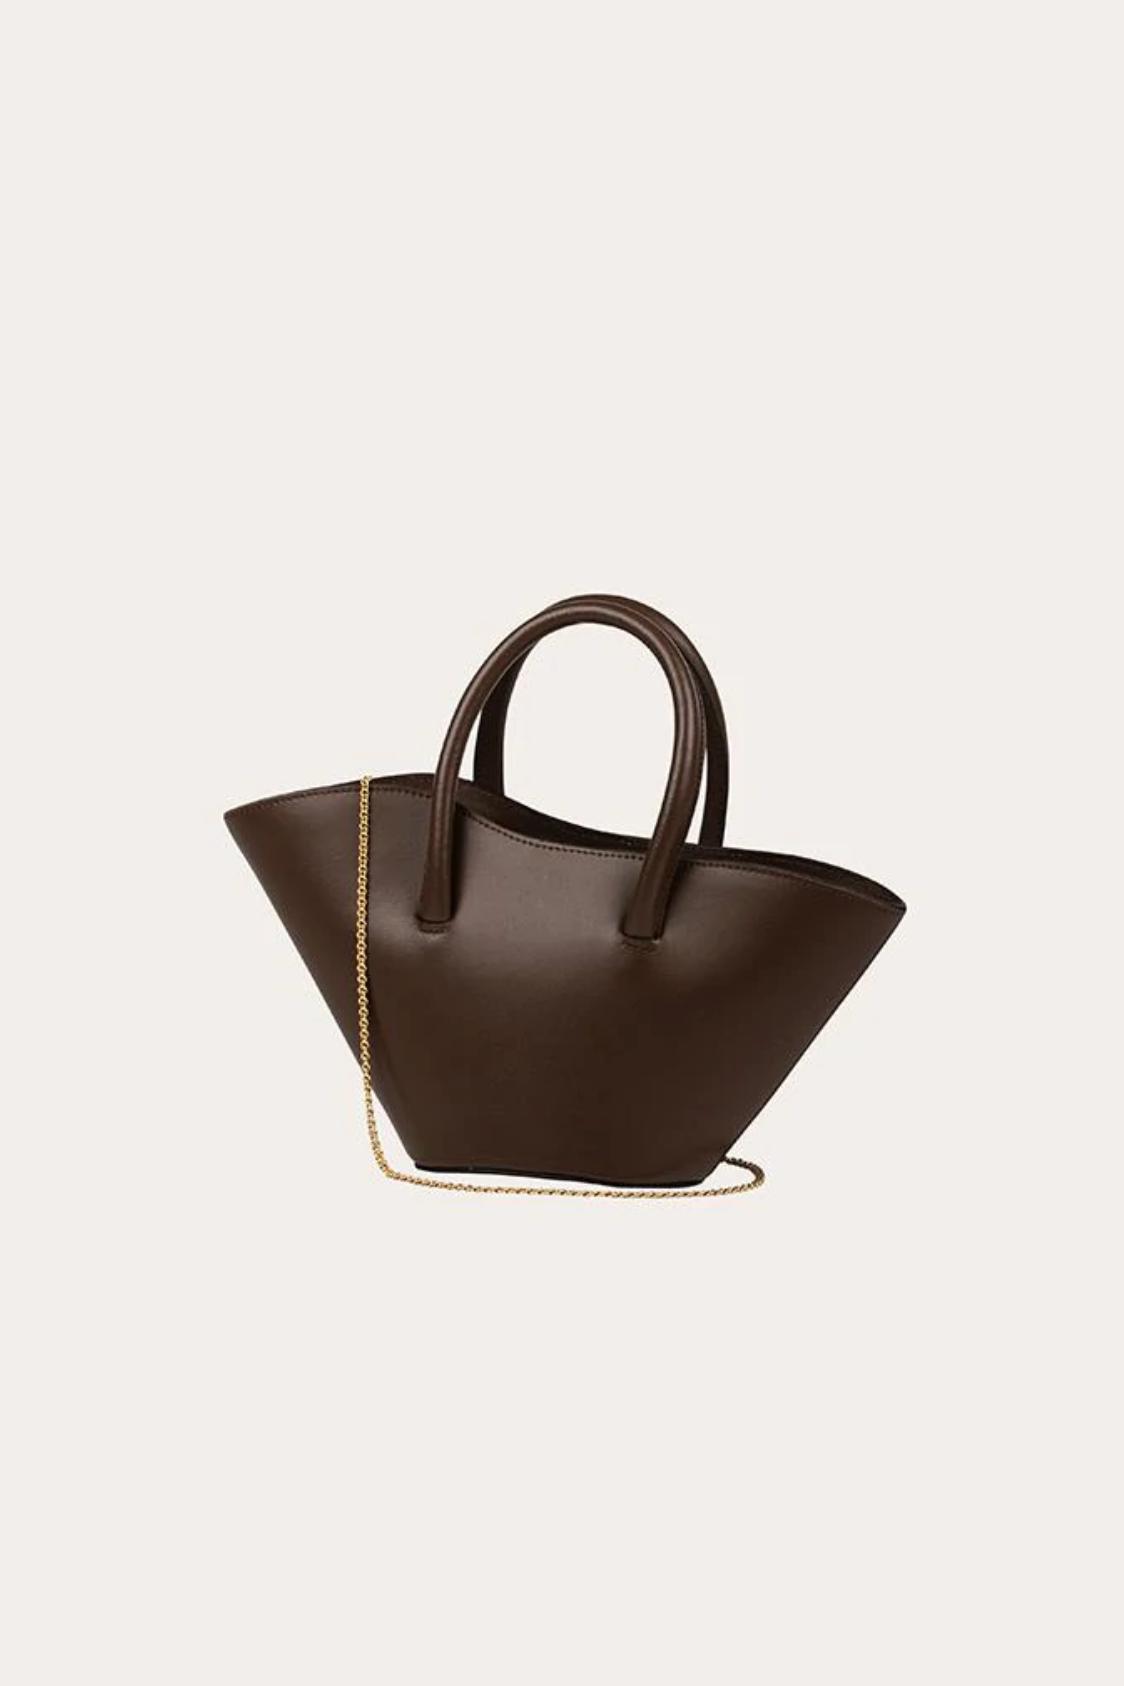 Little Liffner Leather Chained Open Tulip Tote Micro in Brown | Lyst